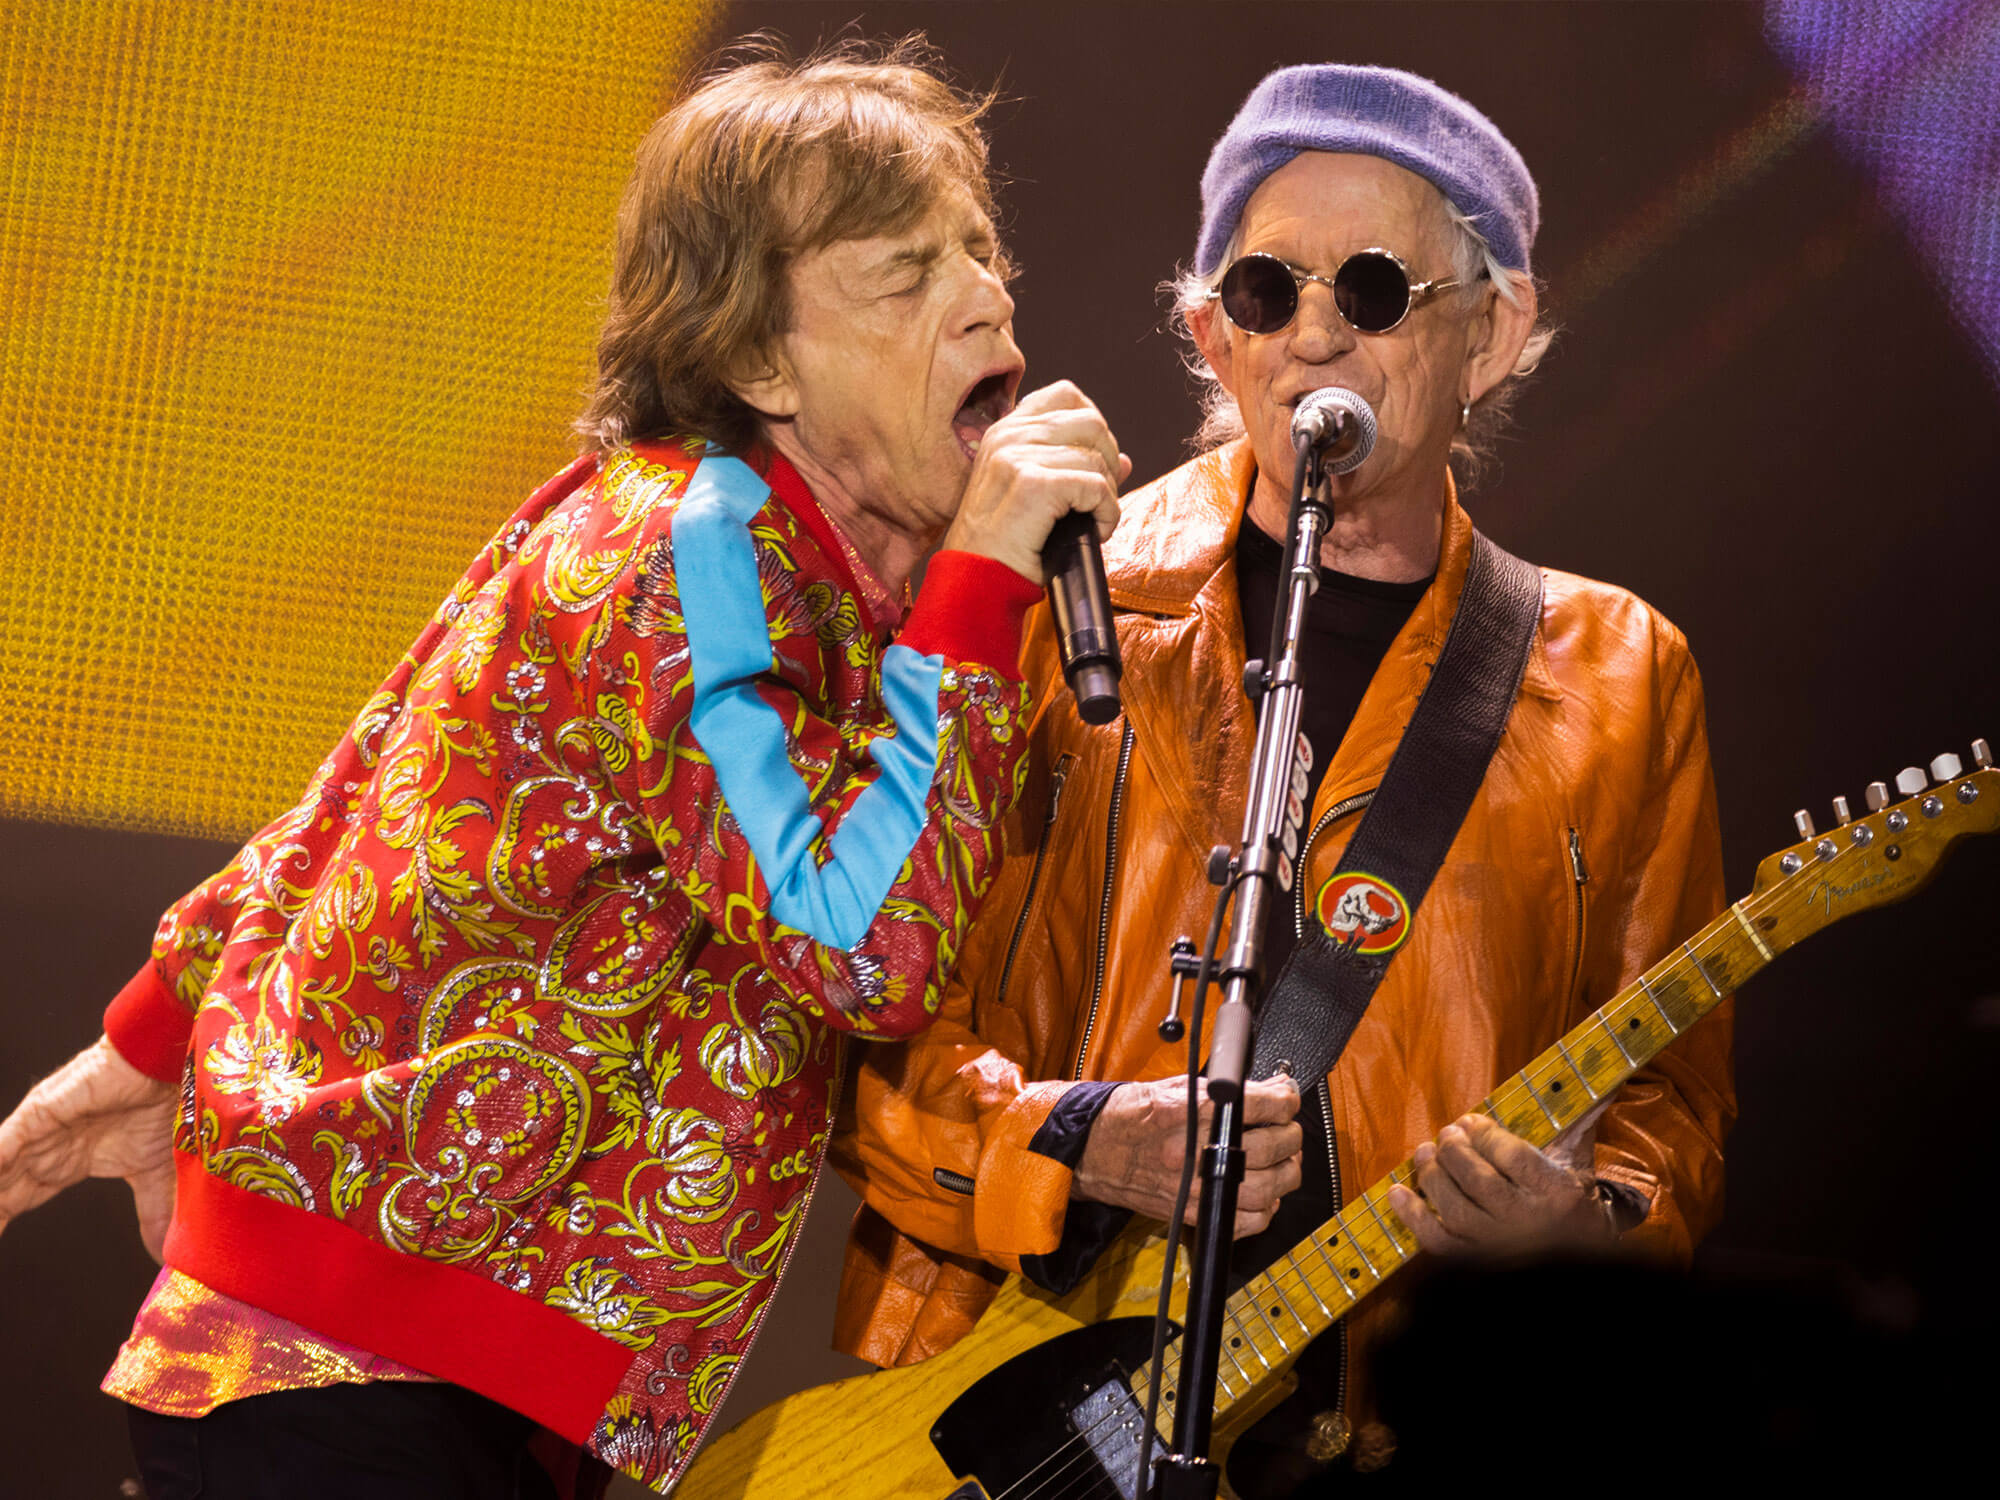 [L-R] Mick Jagger and Keith Richards of the Rolling Stones